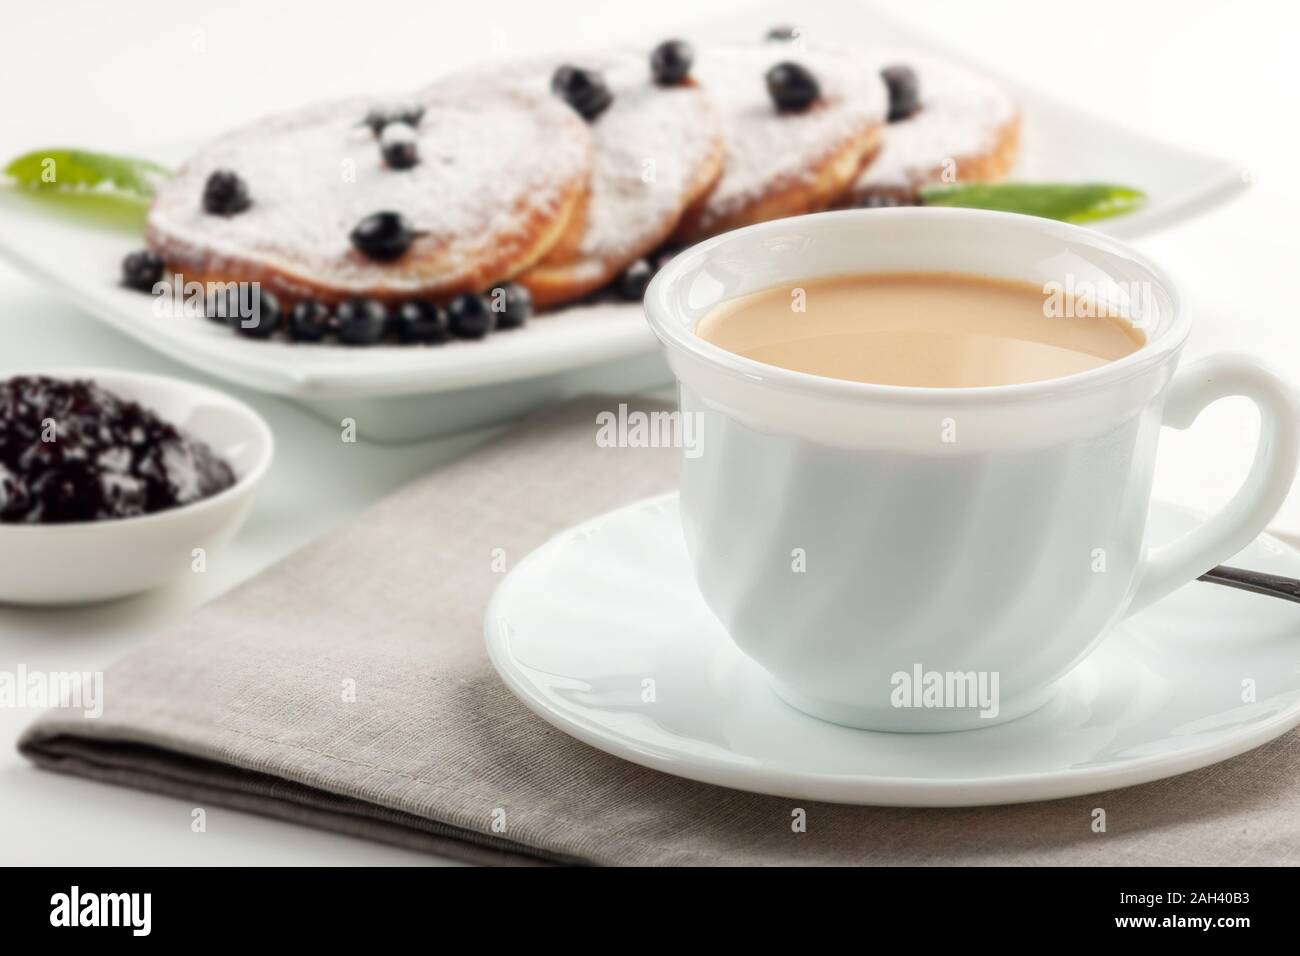 Cup of coffee with milk and a plate with pancakes on a white table. Stock Photo